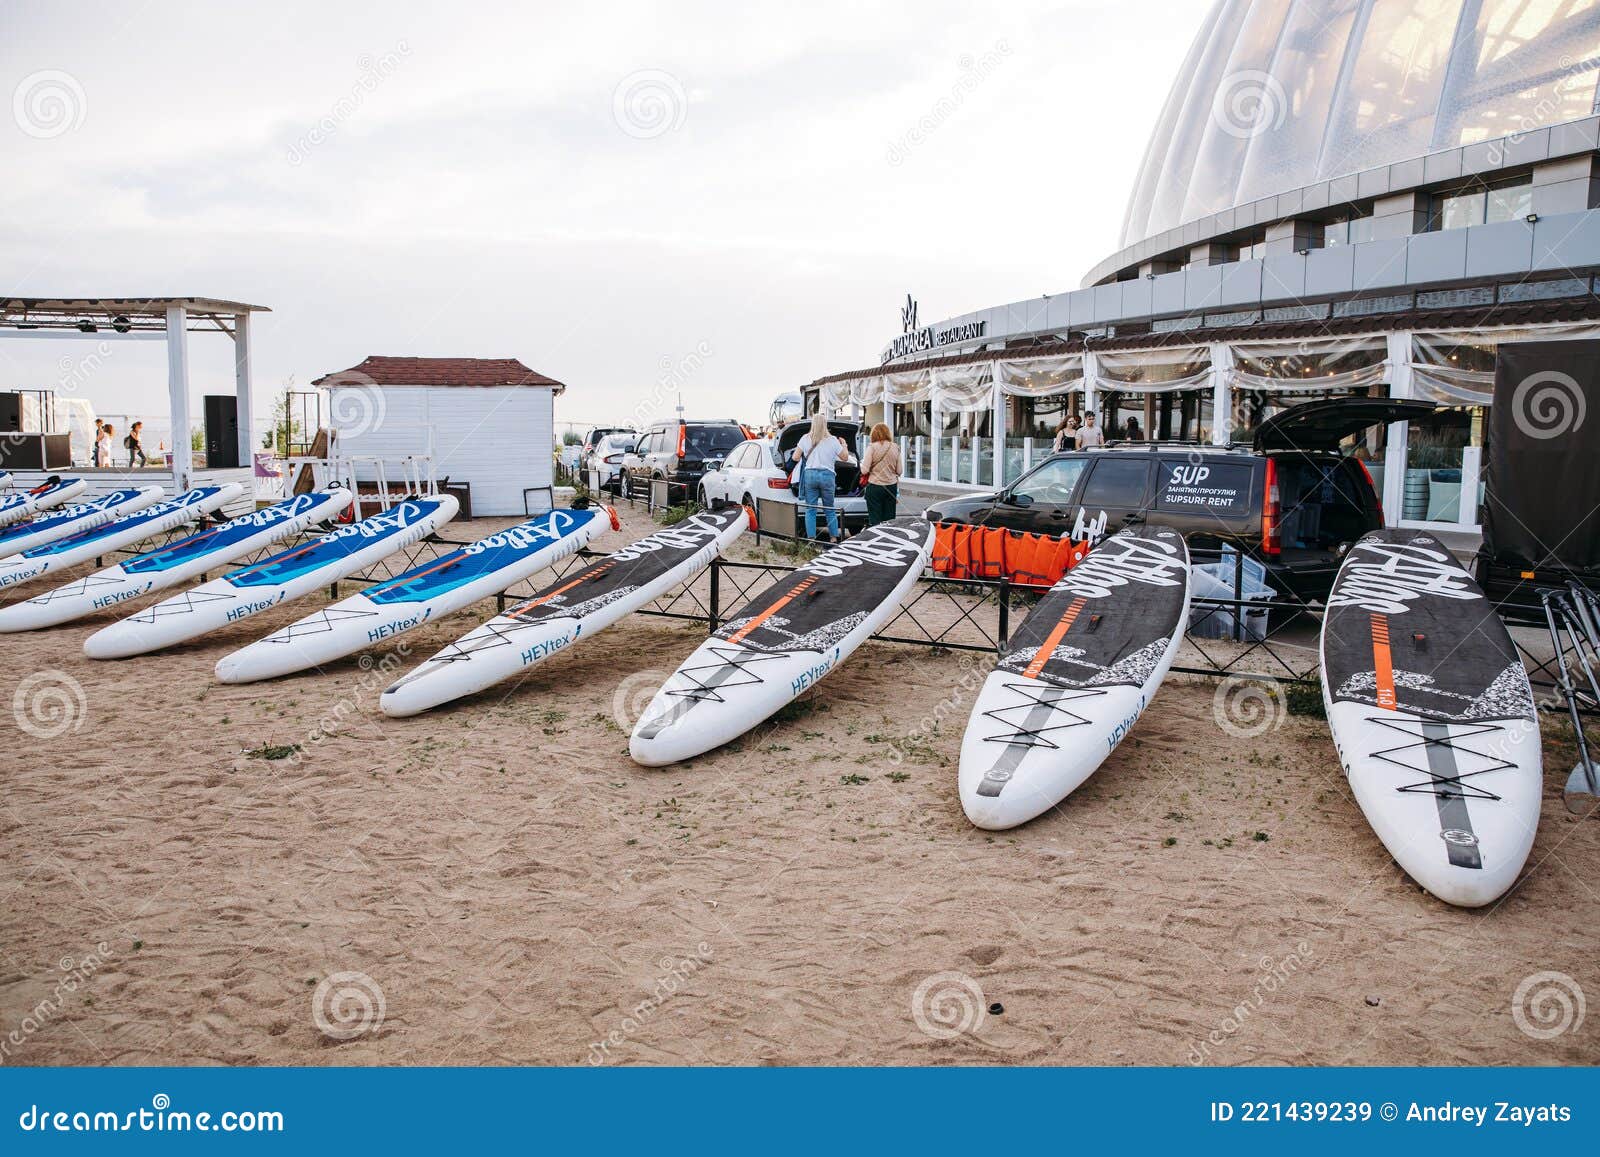 SUP Surf Accessories. Station Active Recreation and Water Sports, Inflatable Boards. Russia, Petersburg, 6.06.2021 Editorial Stock Image of ports, boards: 221439239